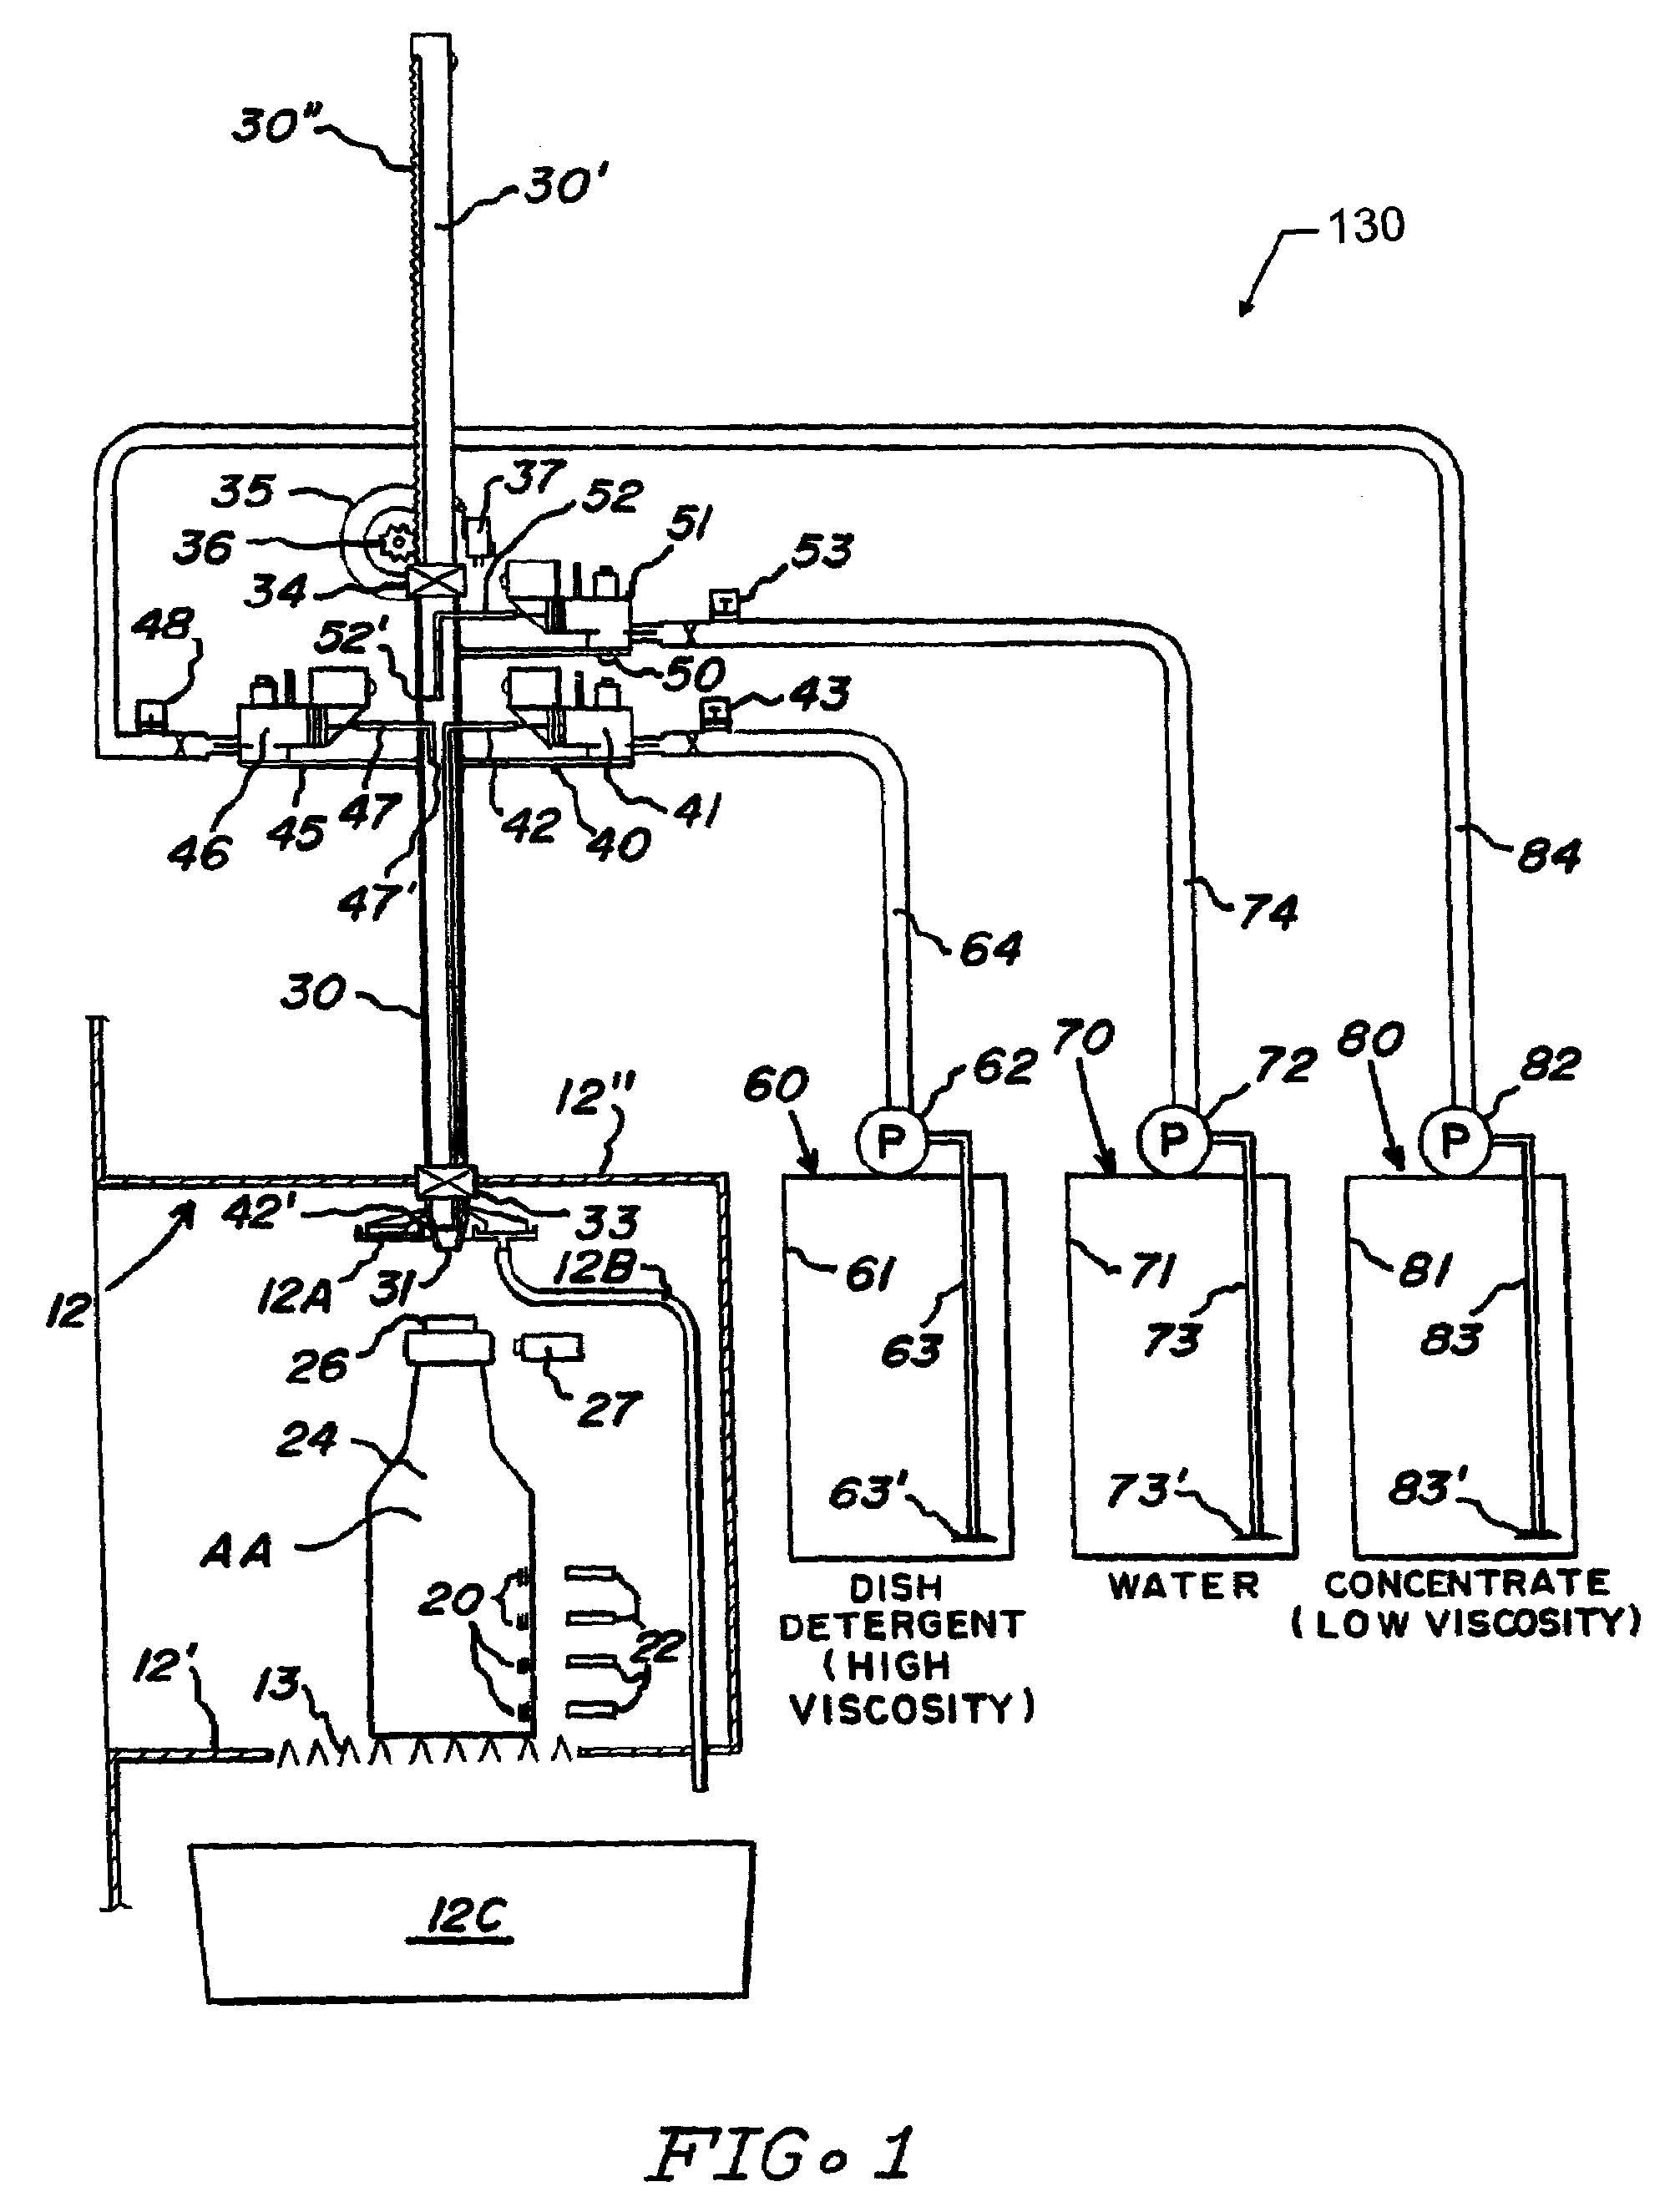 Method and apparatus for vending a containerized liquid product utilizing an automatic self-service refill system